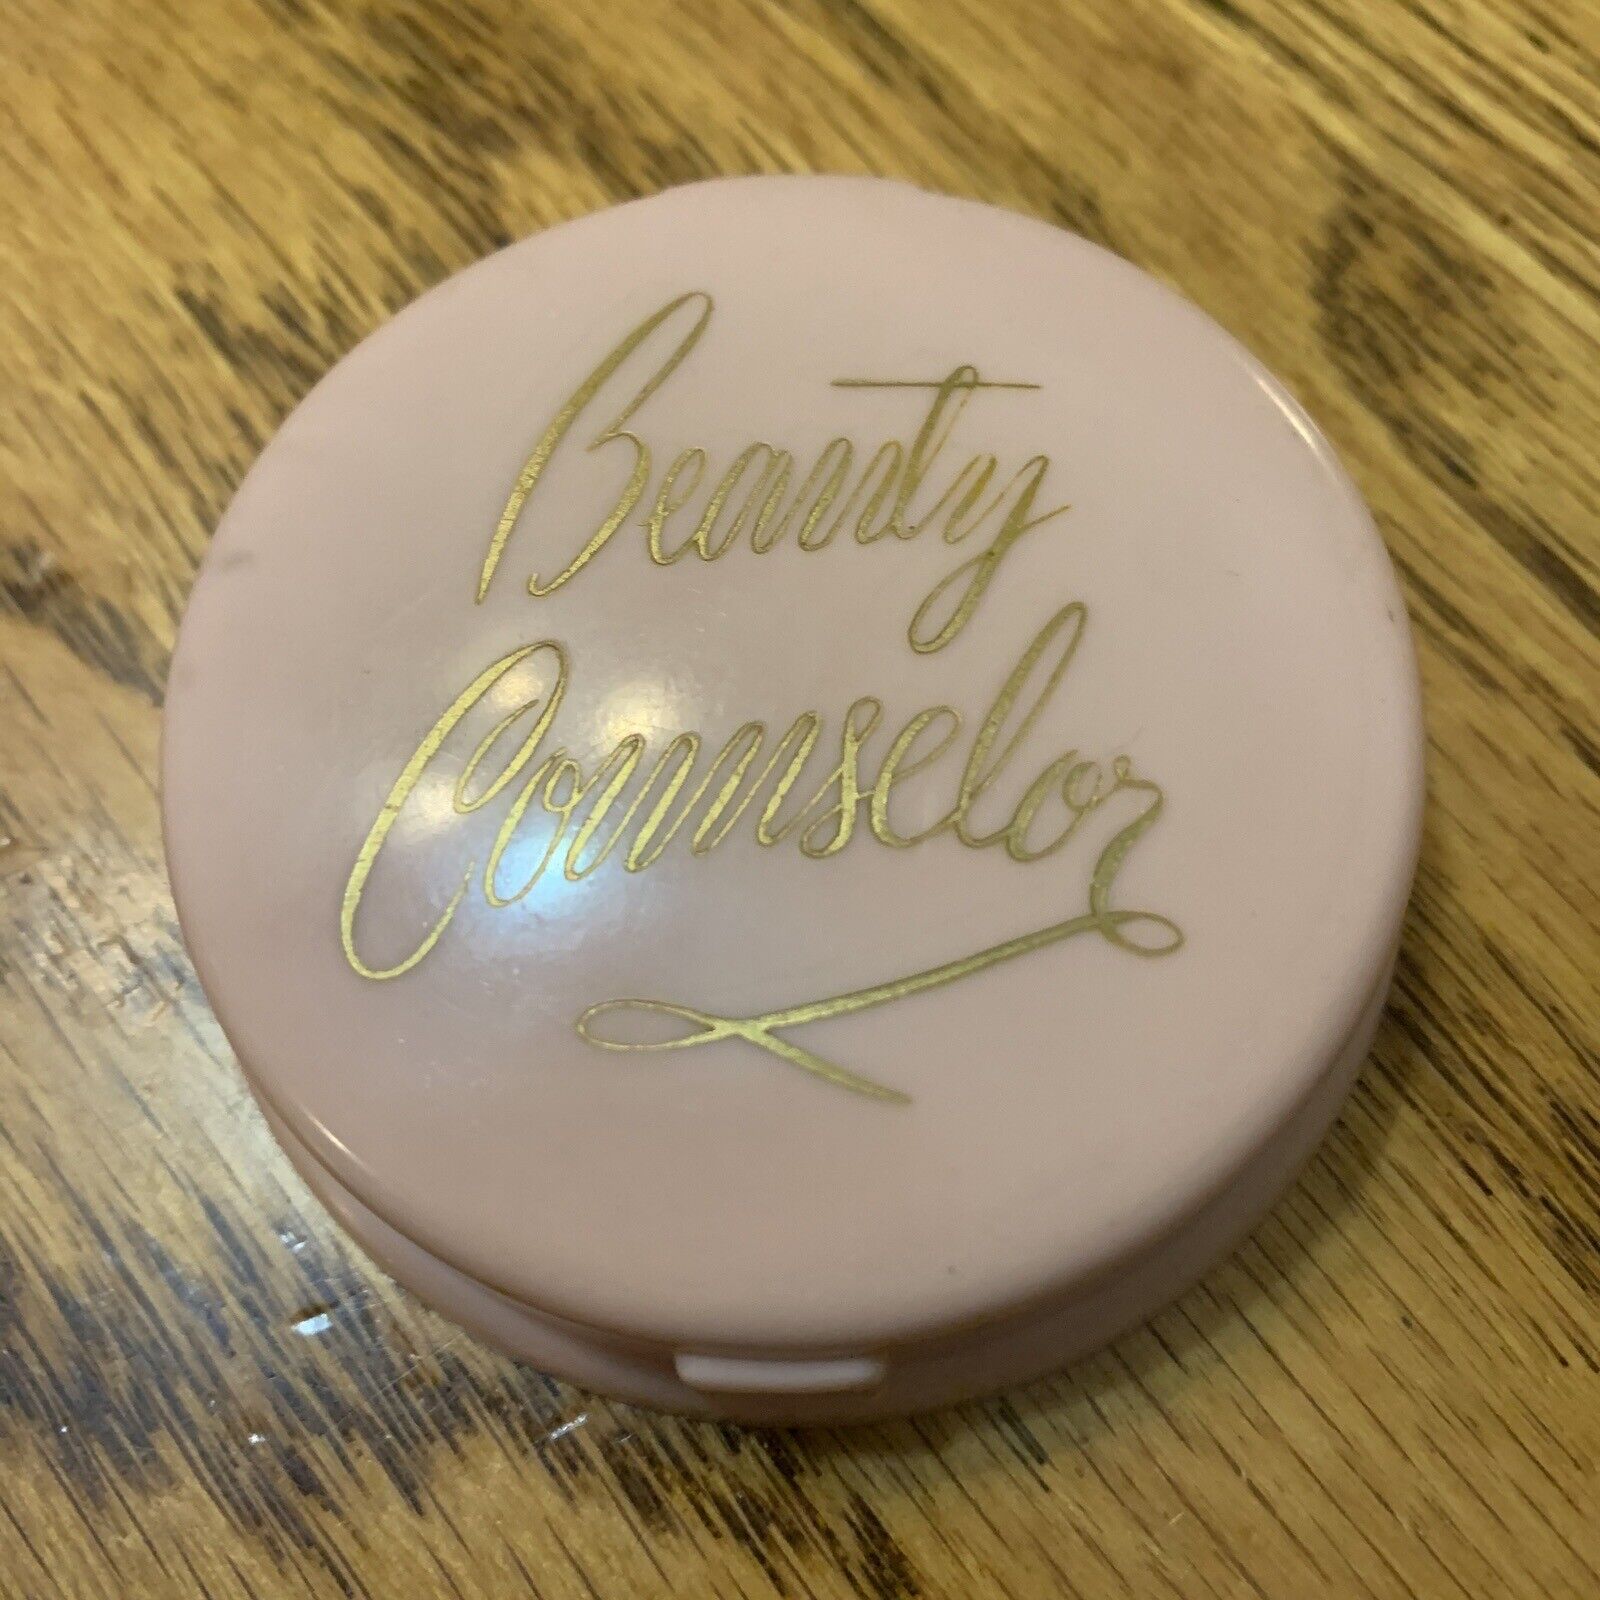 Beauty Counselor Celluloid Compact Pressed Powder Fair Rose Vintage